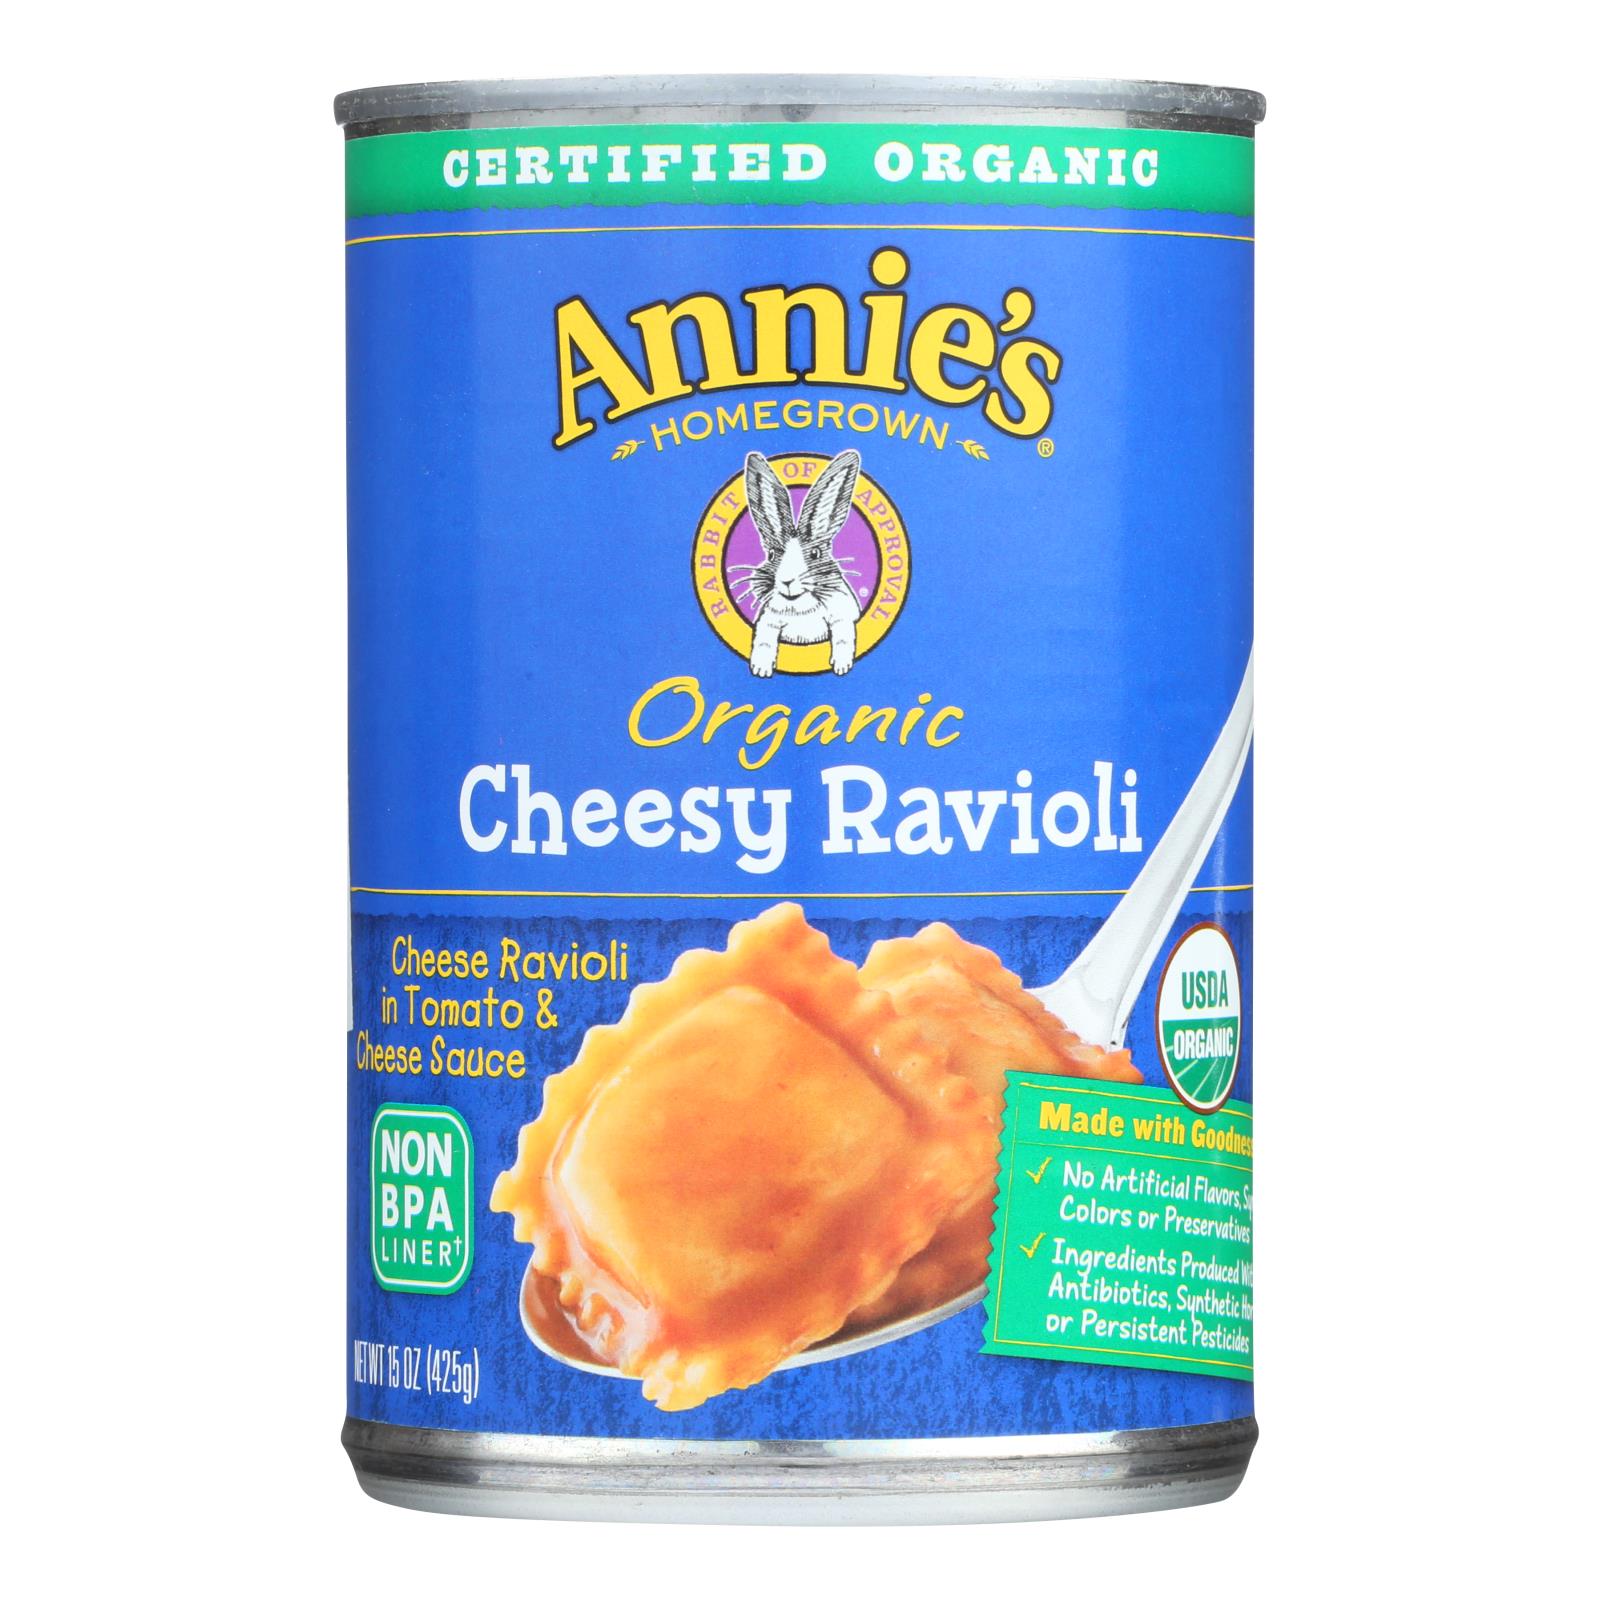 Annie'S Homegrown, Annie's Homegrown Organic Cheesy Ravioli In Tomato and Cheese Sauce - Case of 12 - 15 oz.